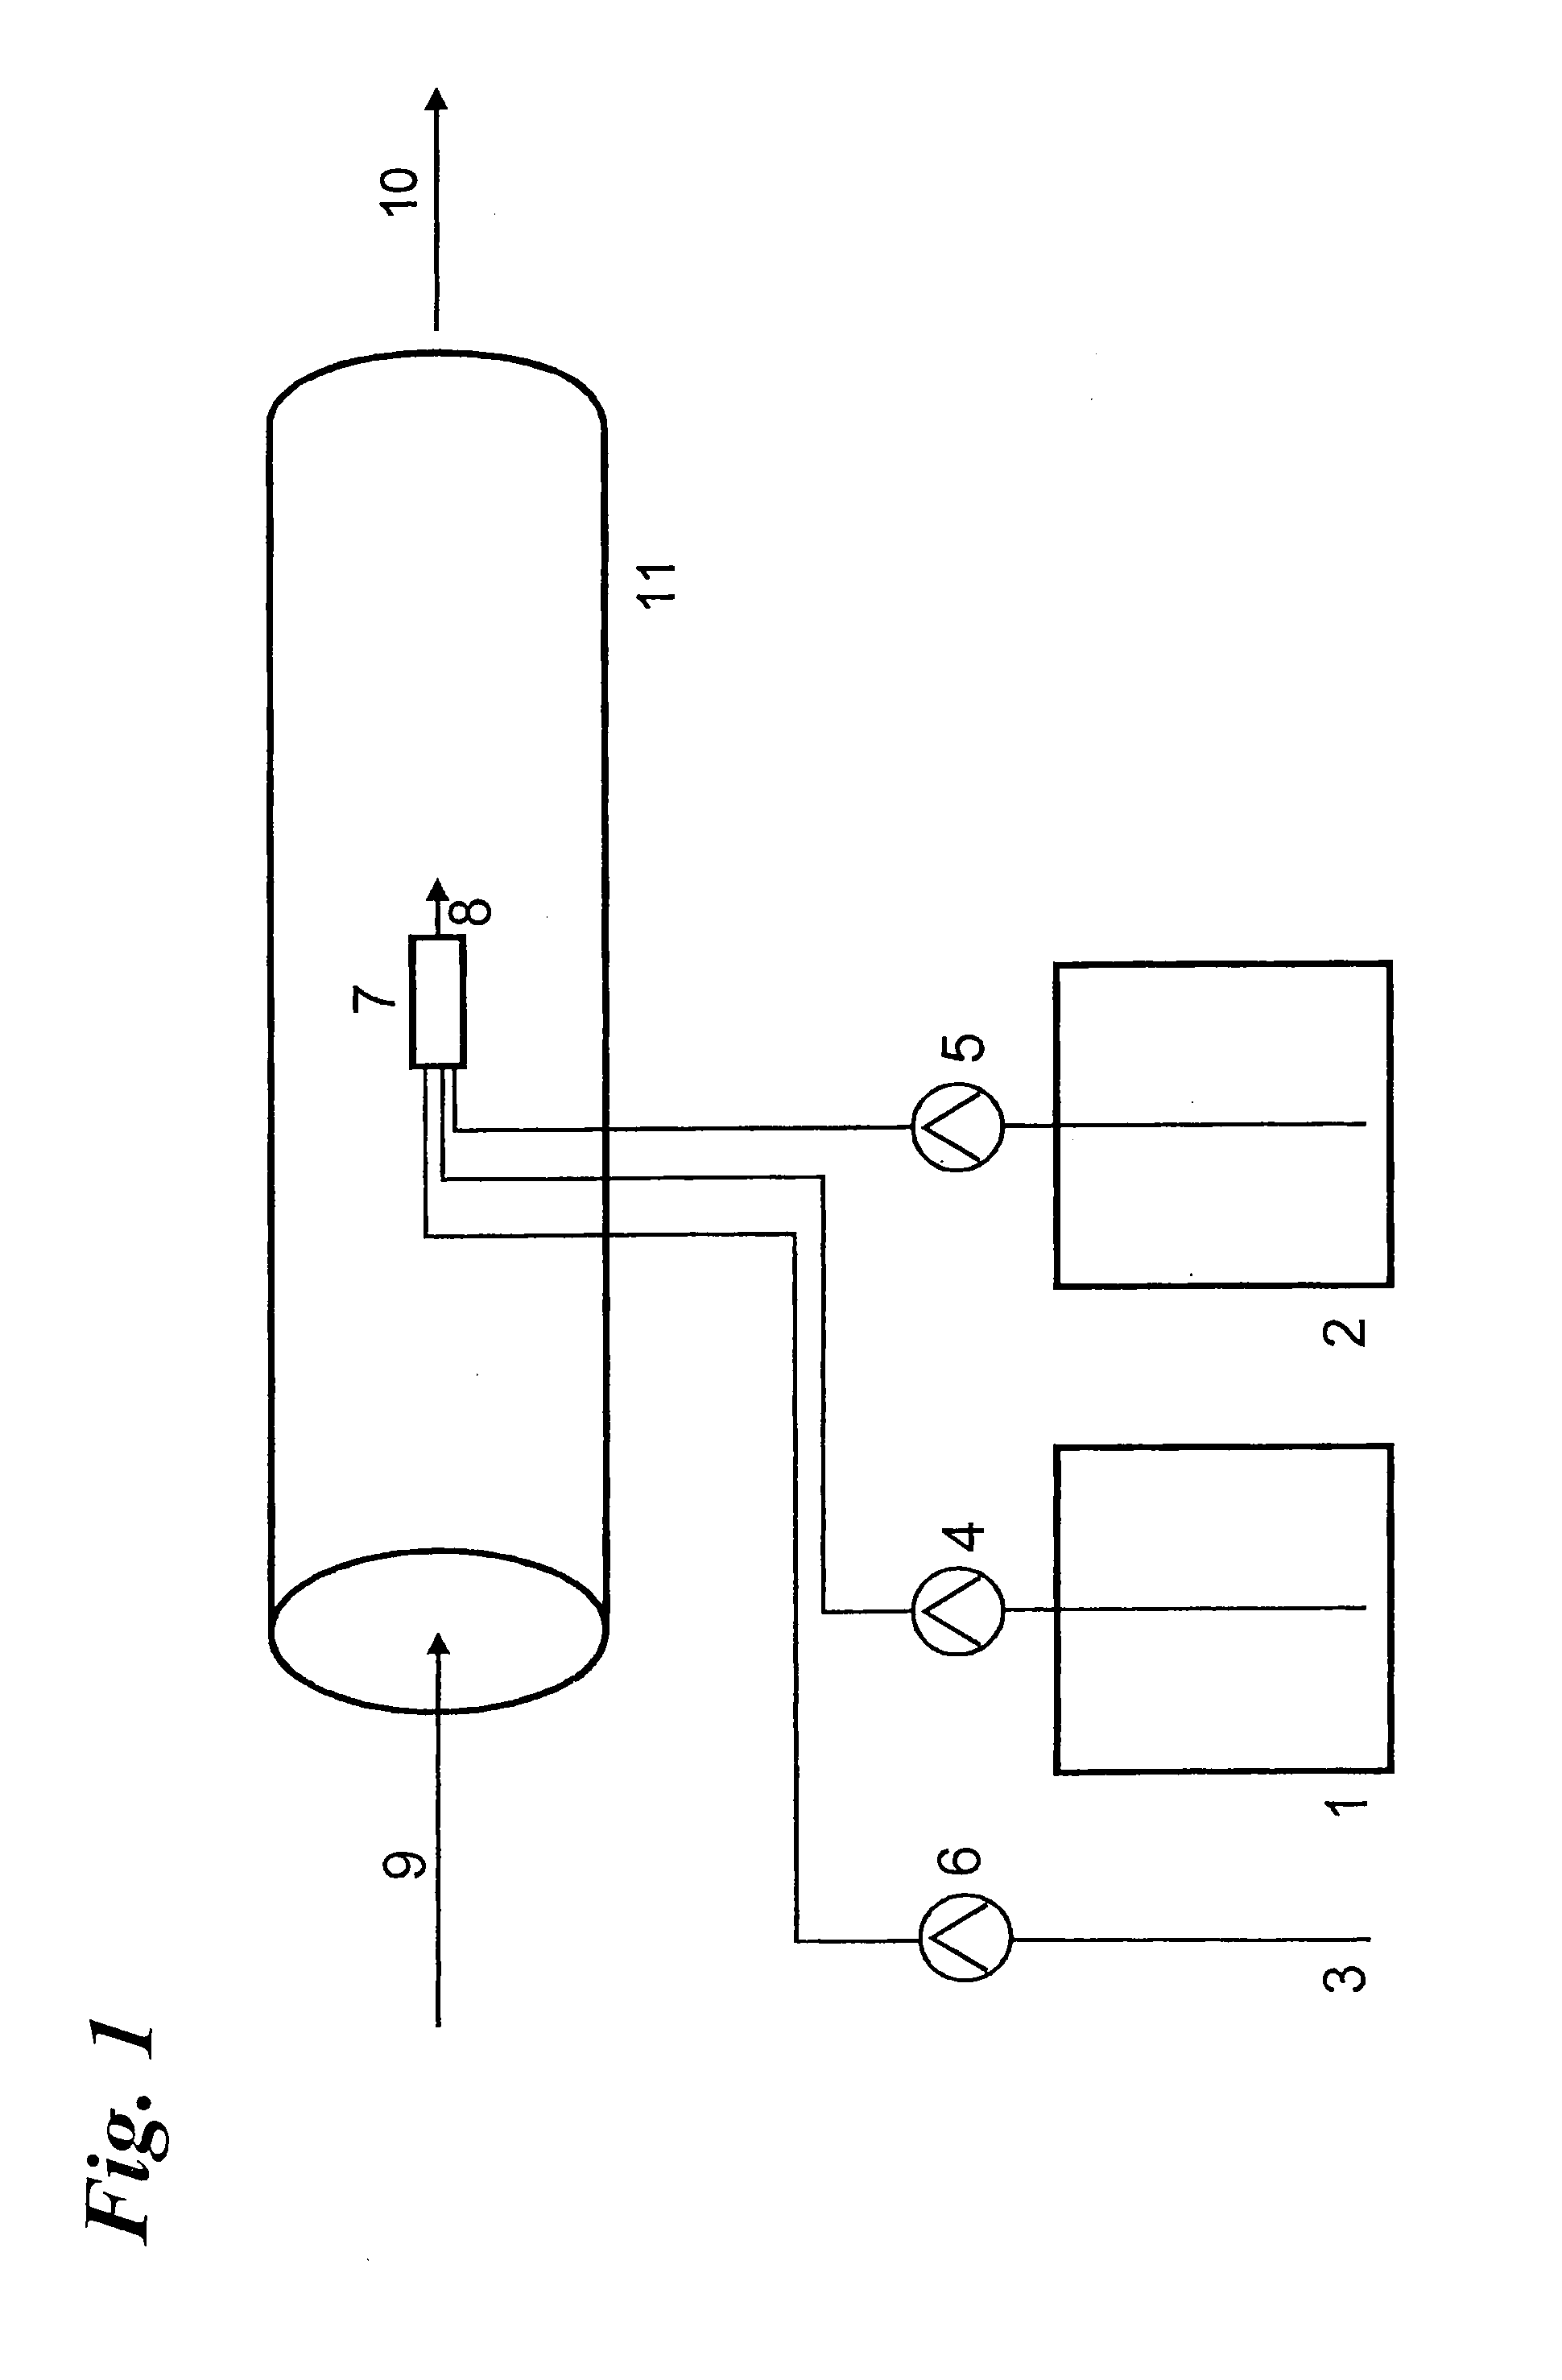 Method of treating water and aqueous systems in pipes with chlorine dioxide